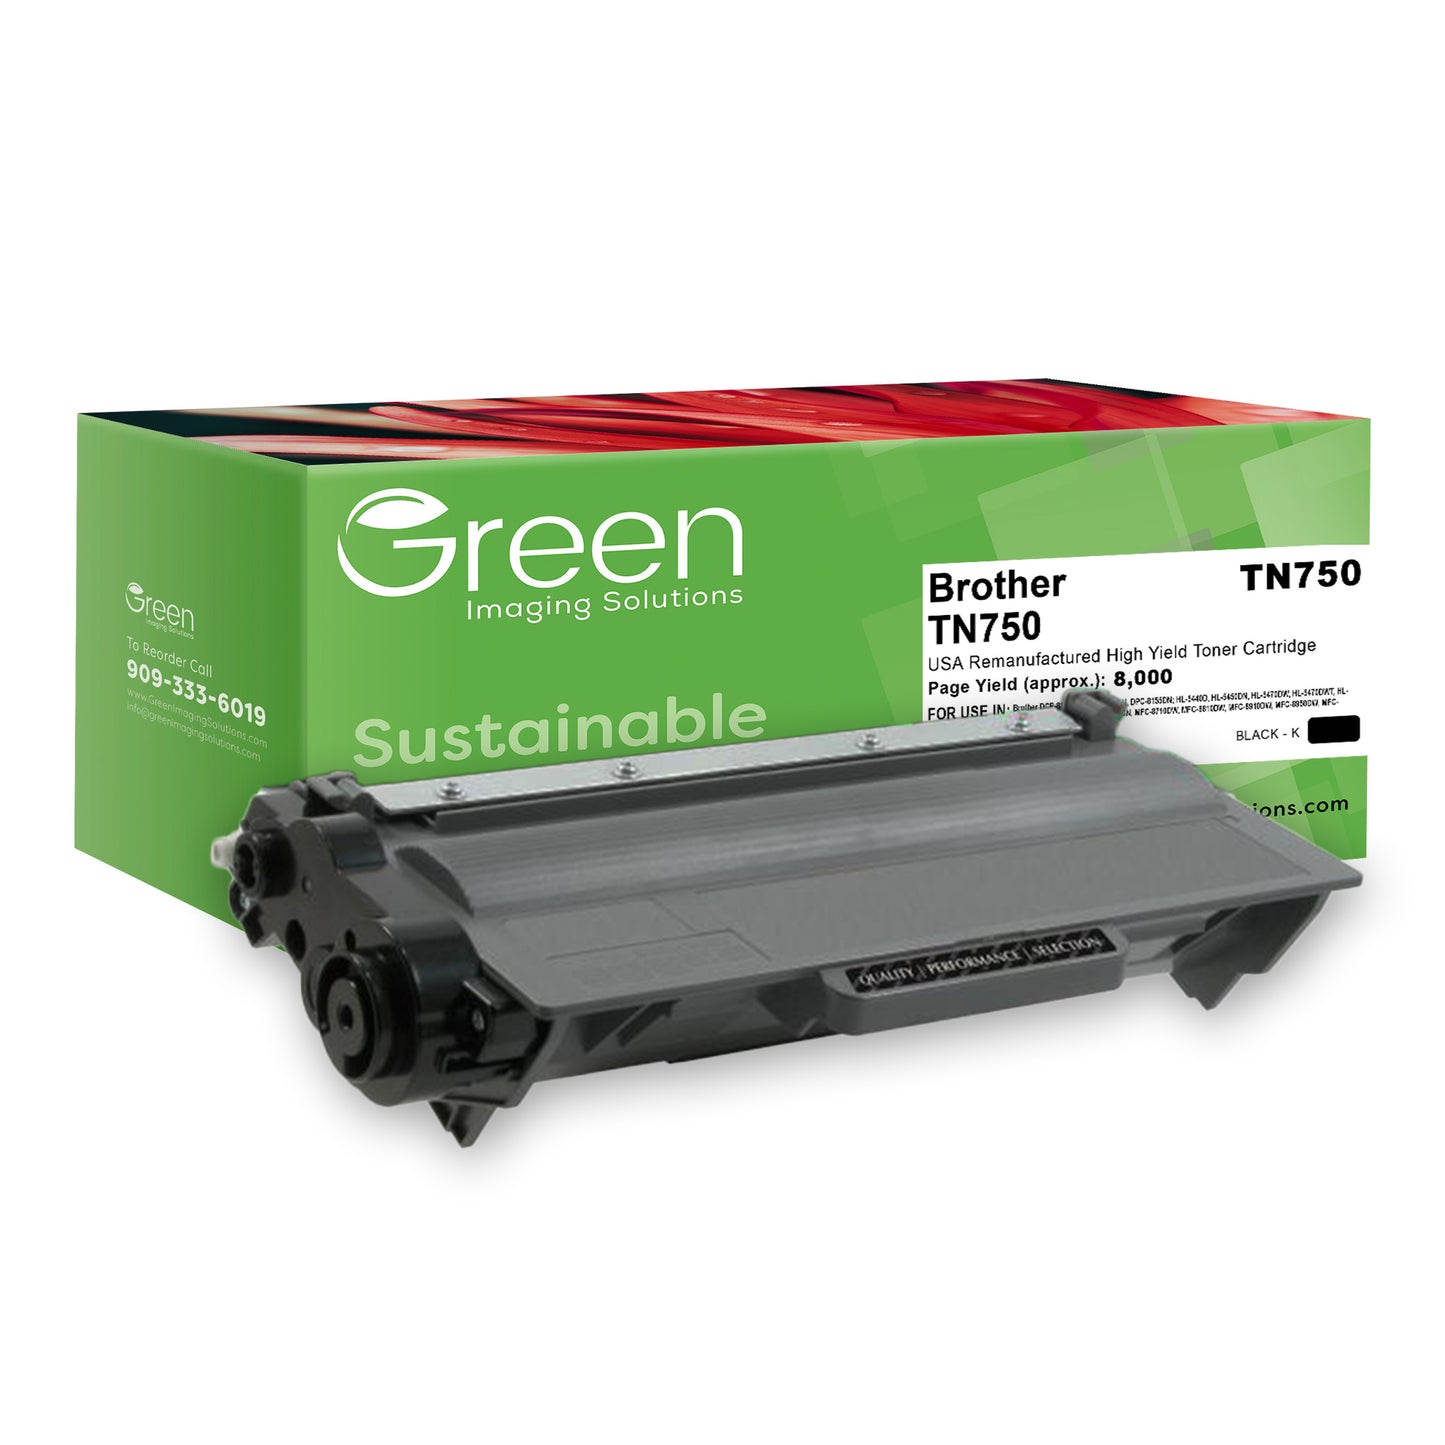 Green Imaging Solutions USA Remanufactured High Yield Toner Cartridge for Brother TN750